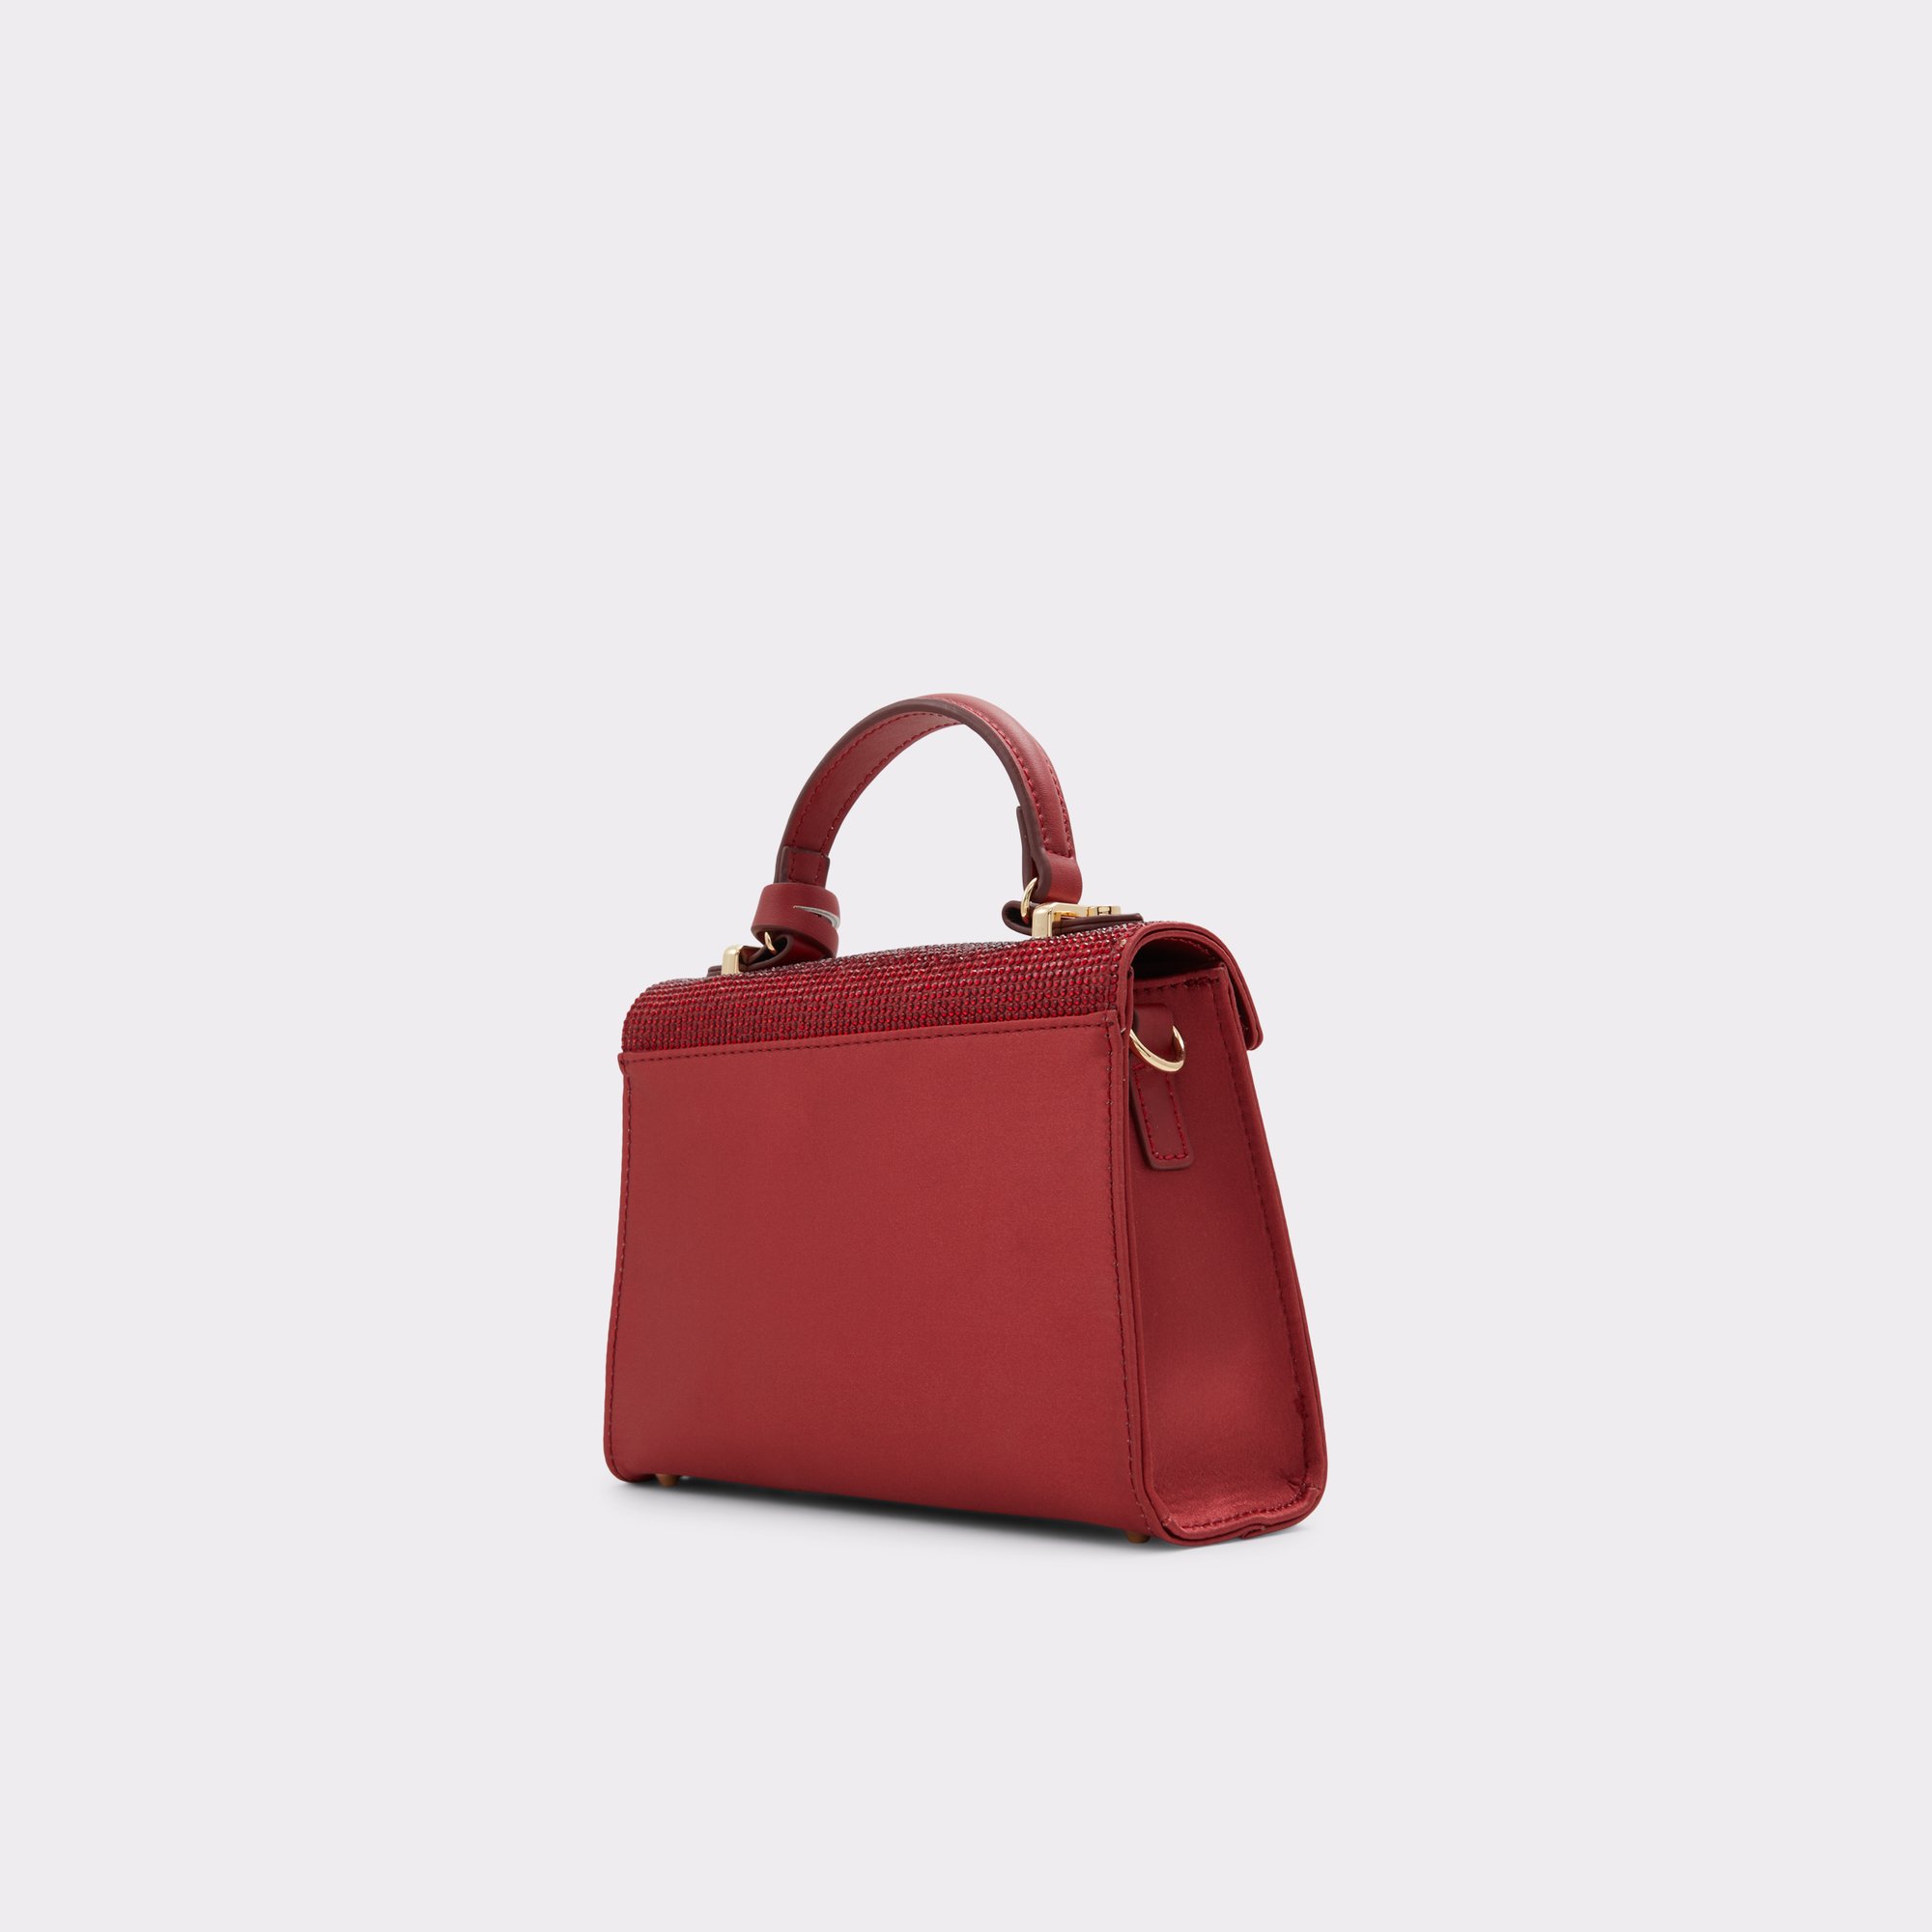 Caisynx Red Women's Top Handle Bags